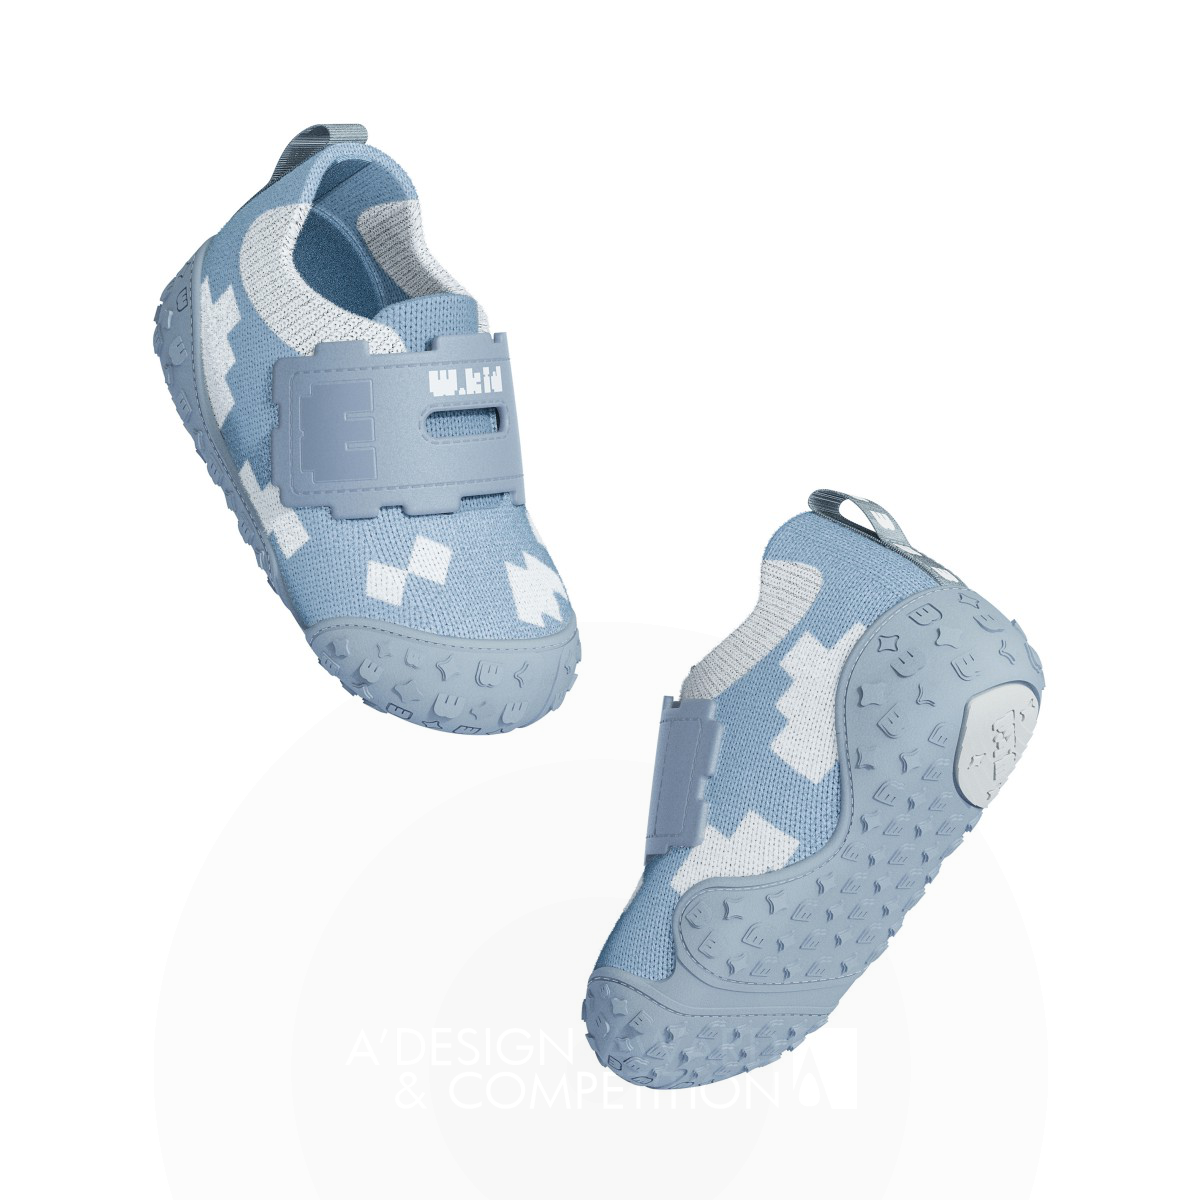 Tiny Steps Flex Shoes by Winner Medical Co., Ltd. Bronze Baby, Kids' and Children's Products Design Award Winner 2024 